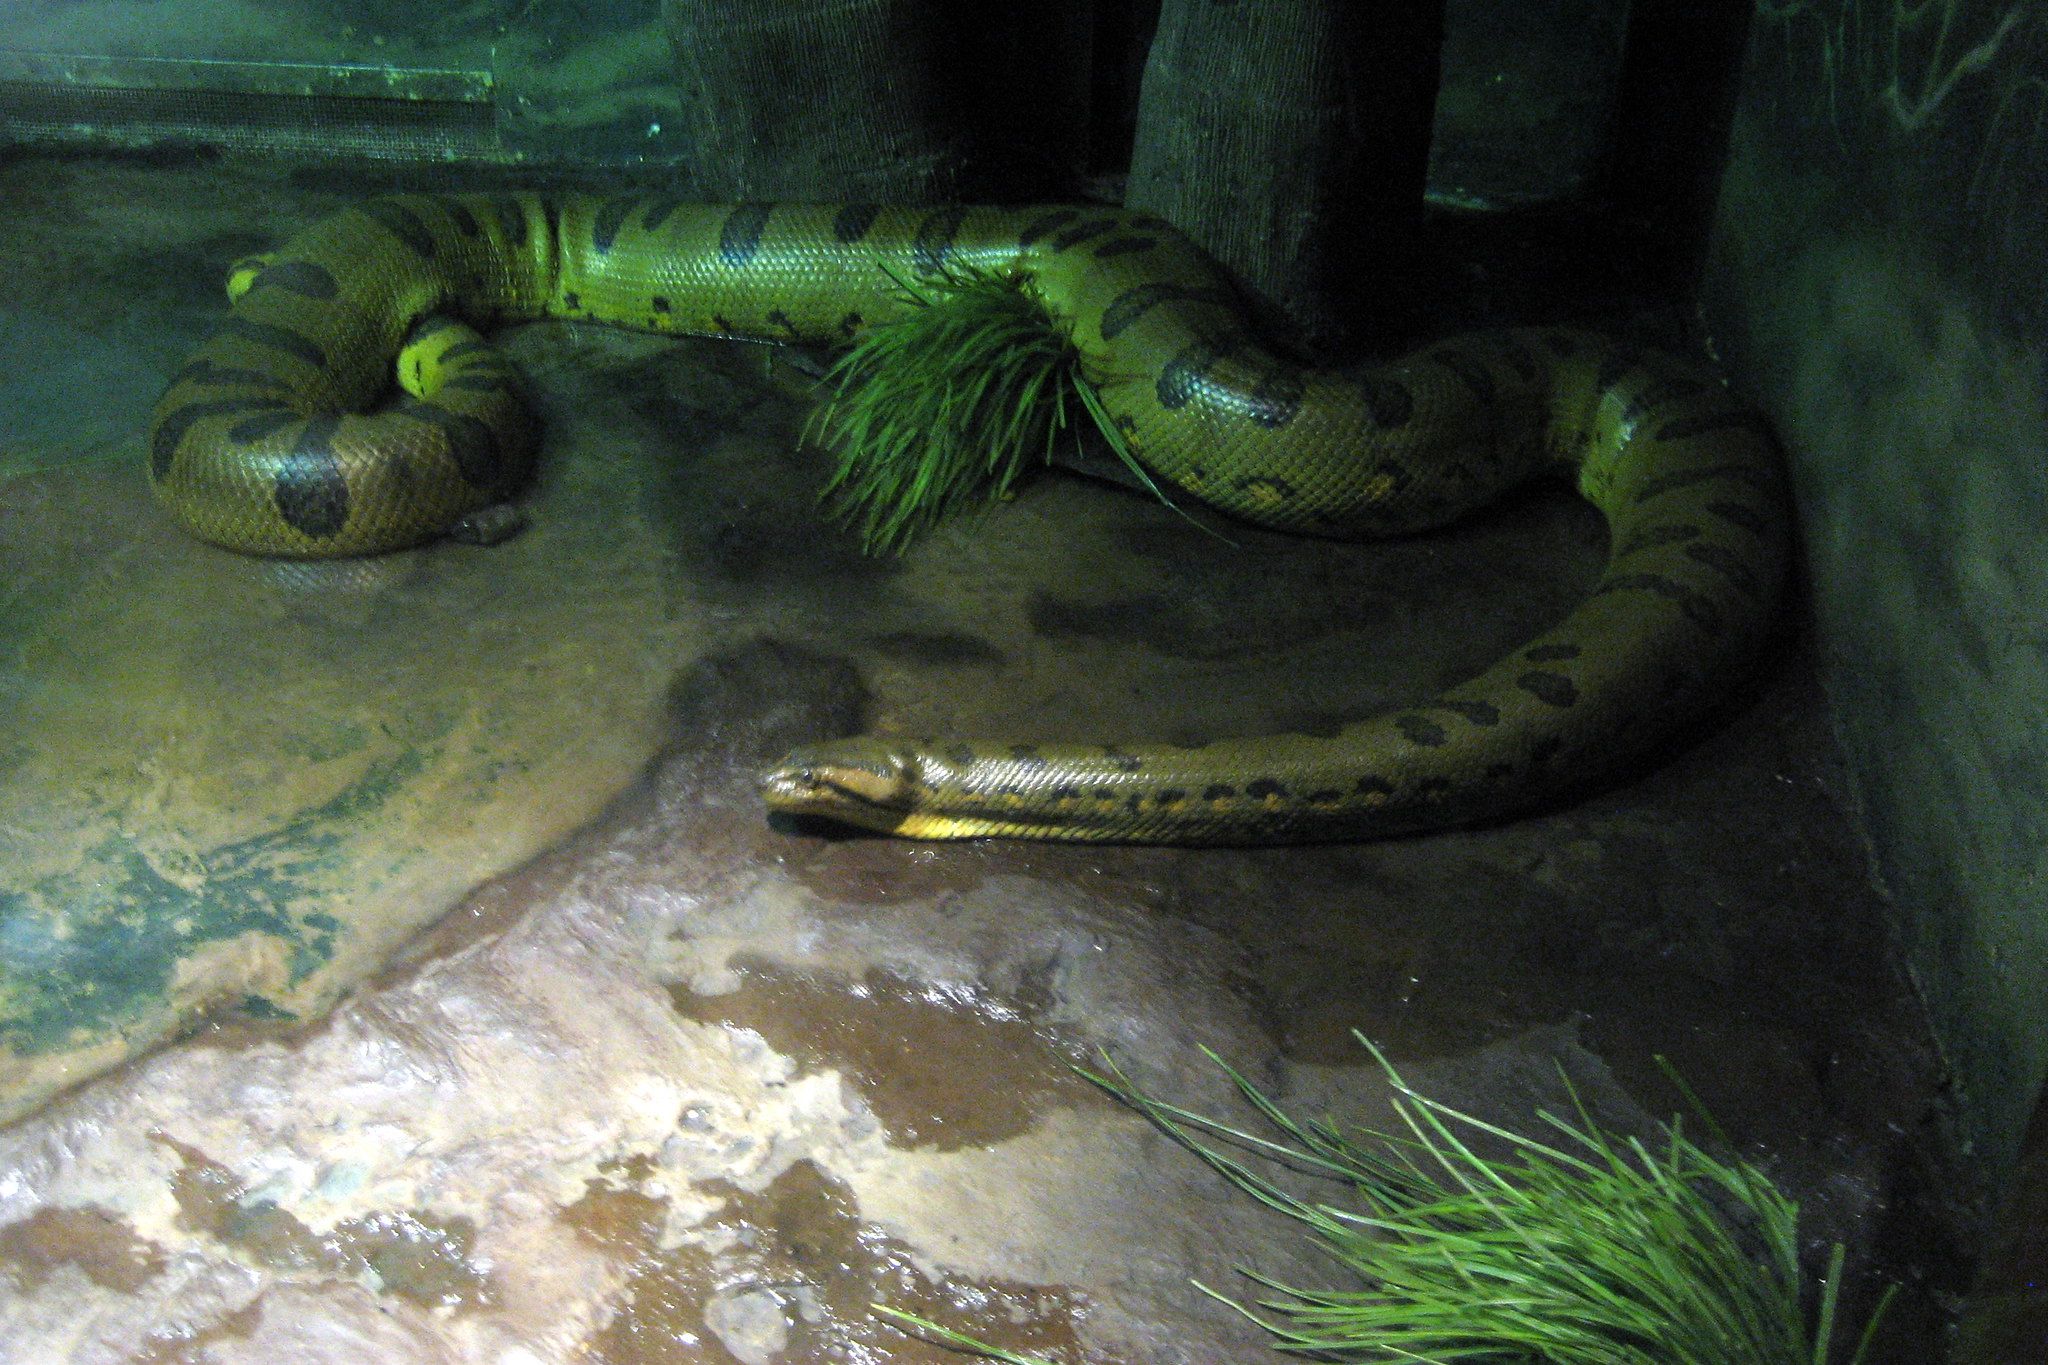 Science Round-up: The world’s largest snake arrives at Odense Zoo